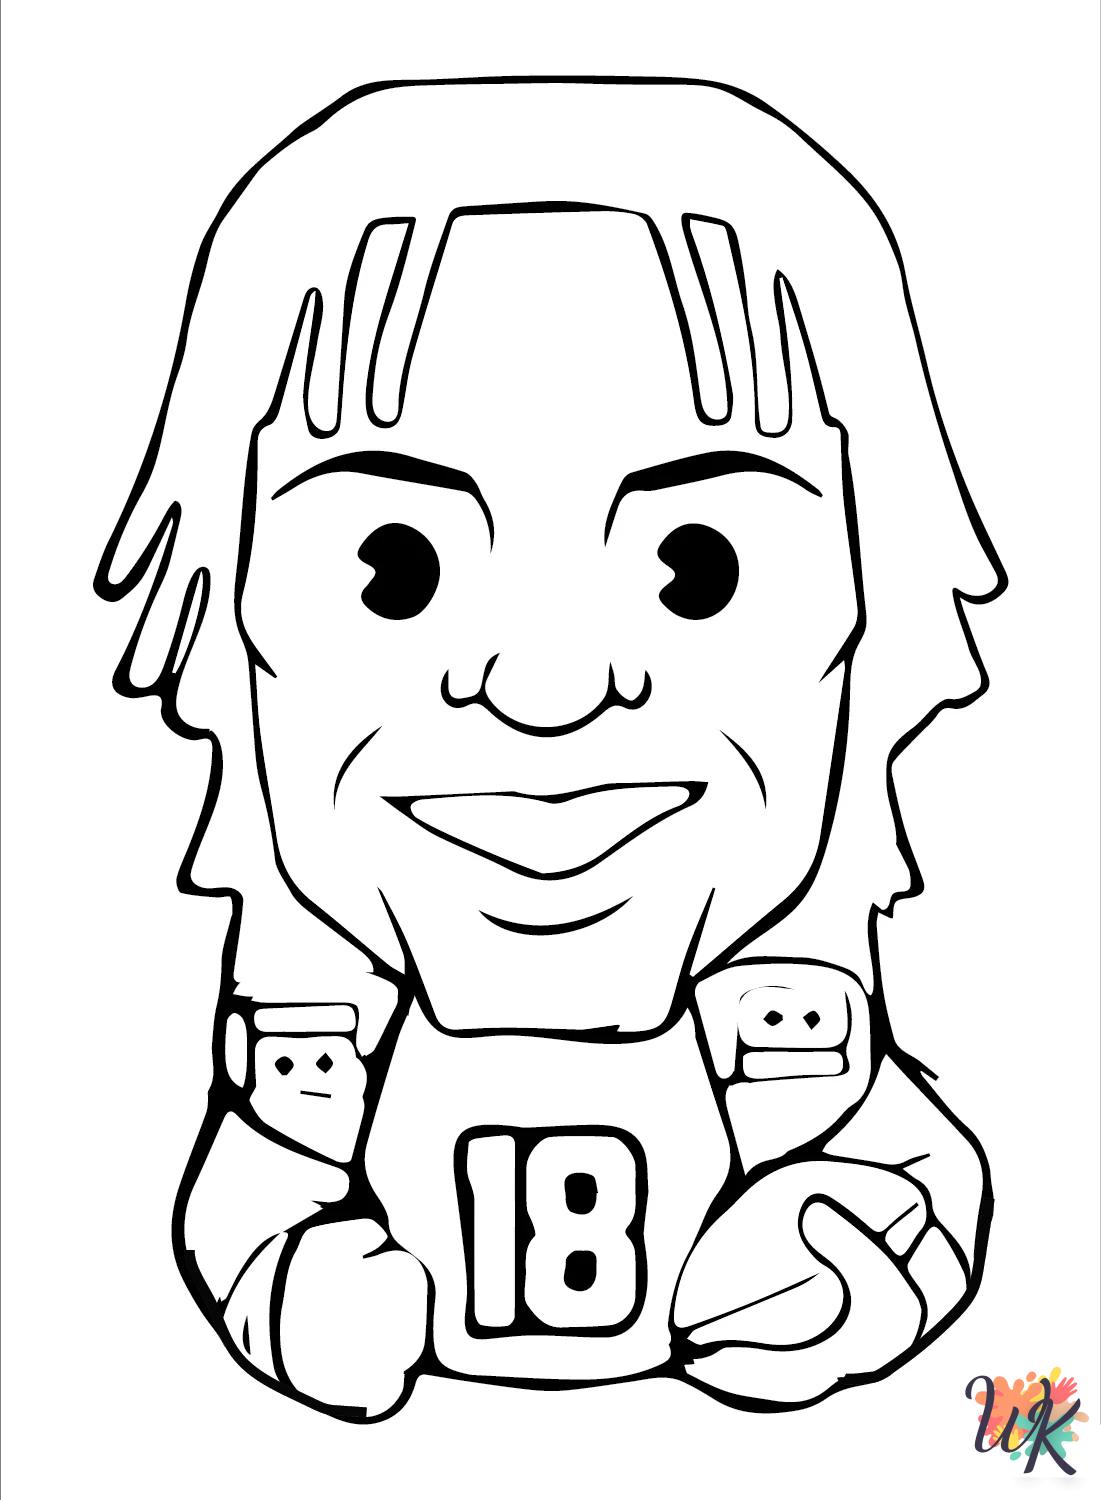 Justin Jefferson Coloring Pages 4